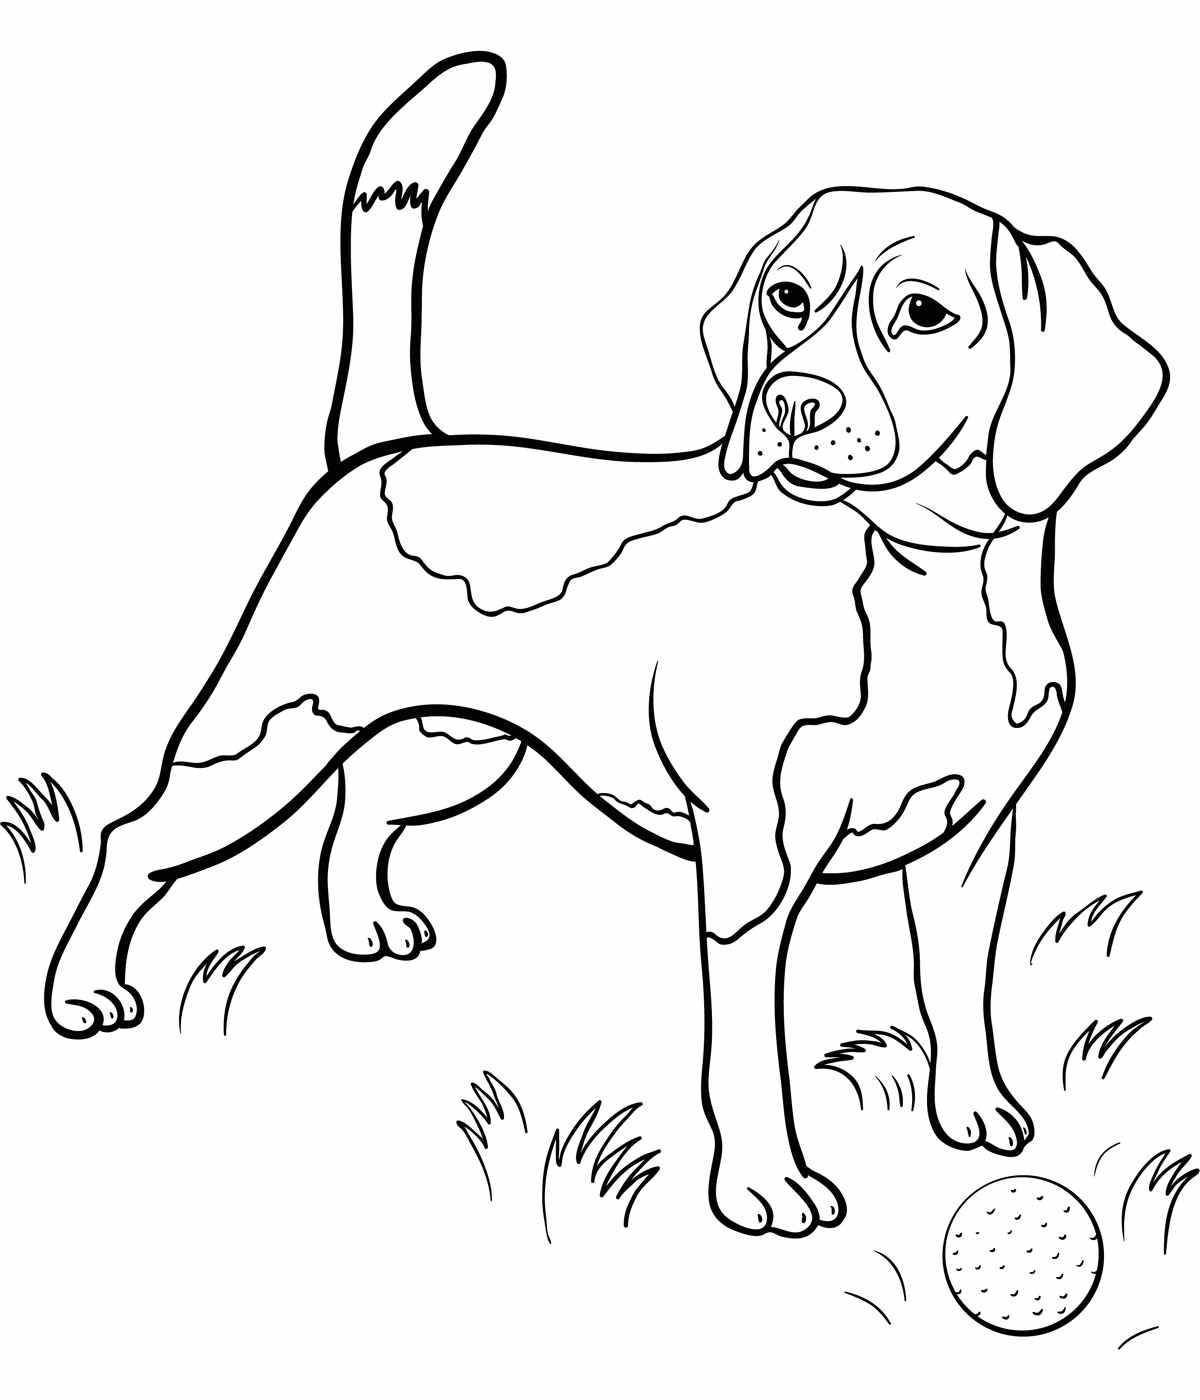 Sparkling beagle coloring page